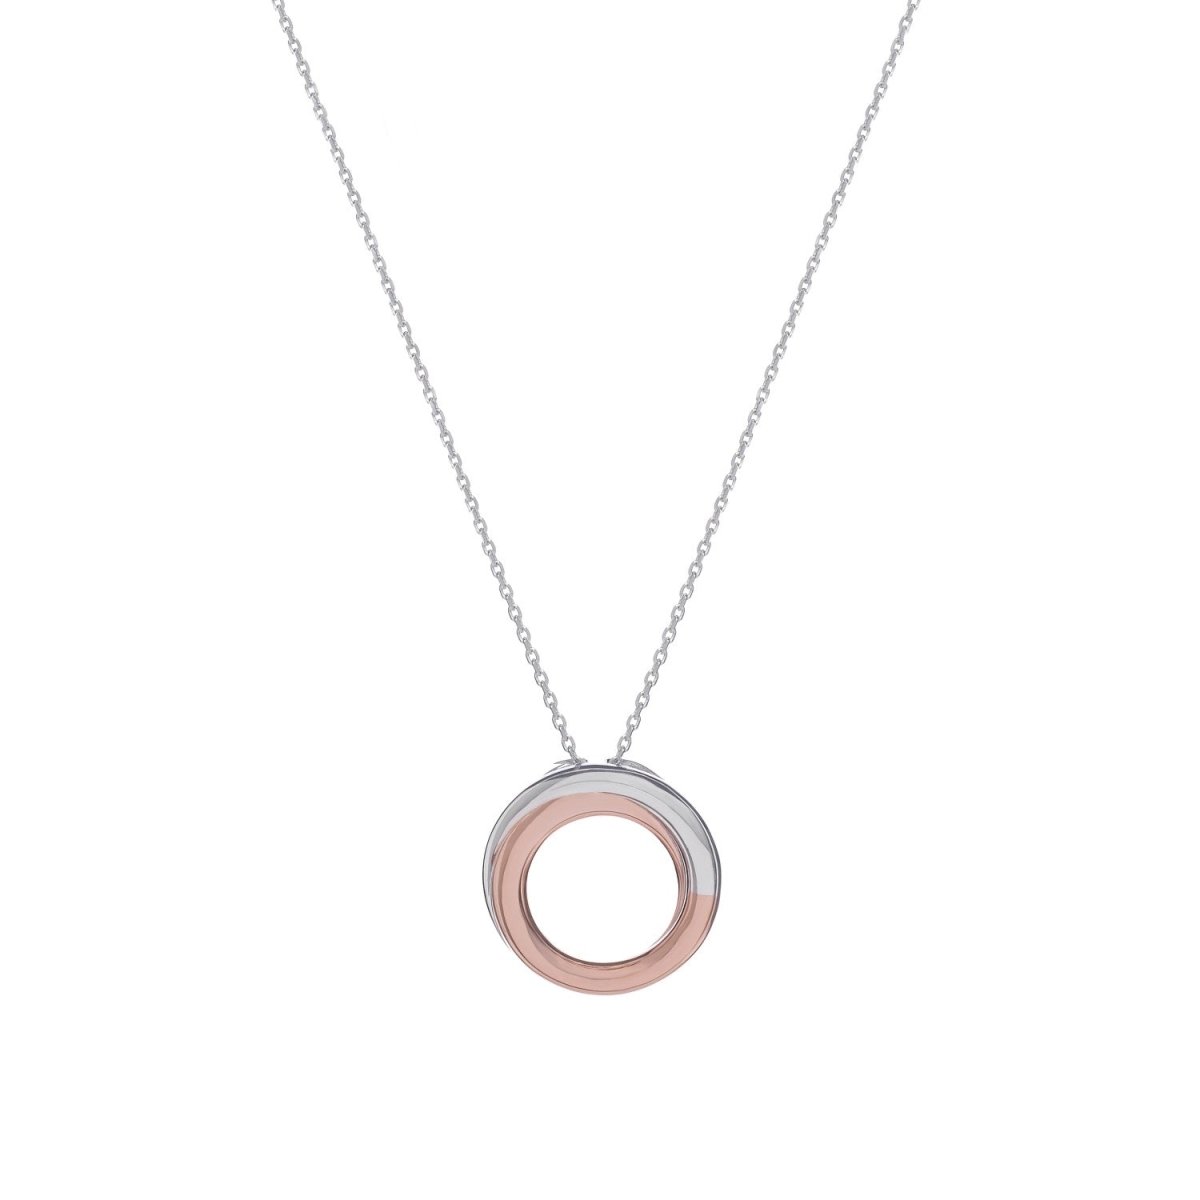 Necklace - Bicolor sterling silver pendants with pink circular design